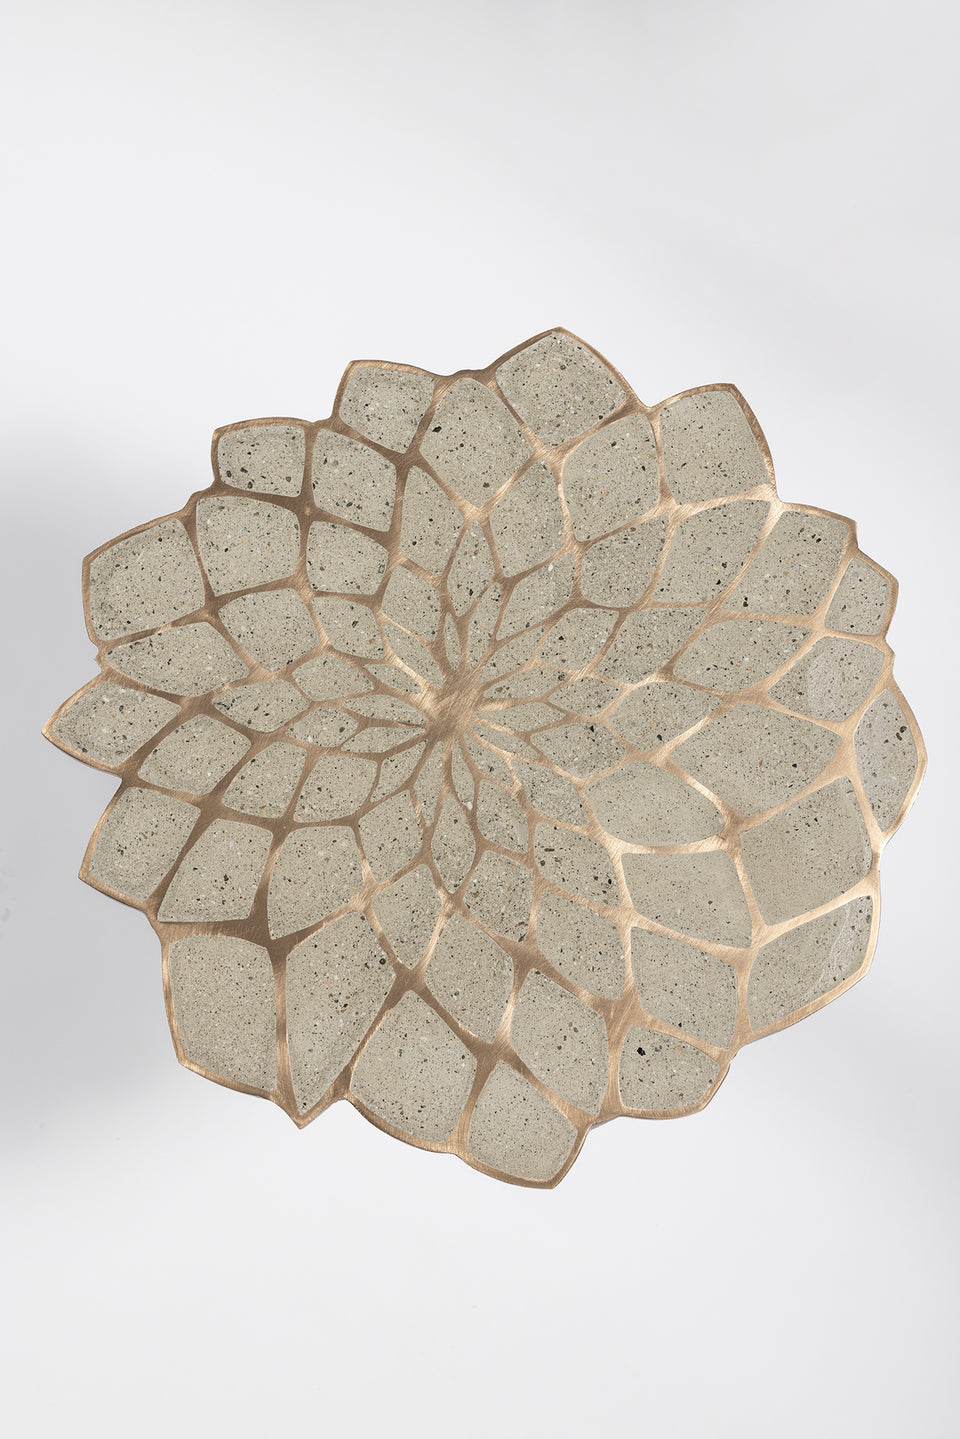 MOSAIC LILY SIDE TABLE